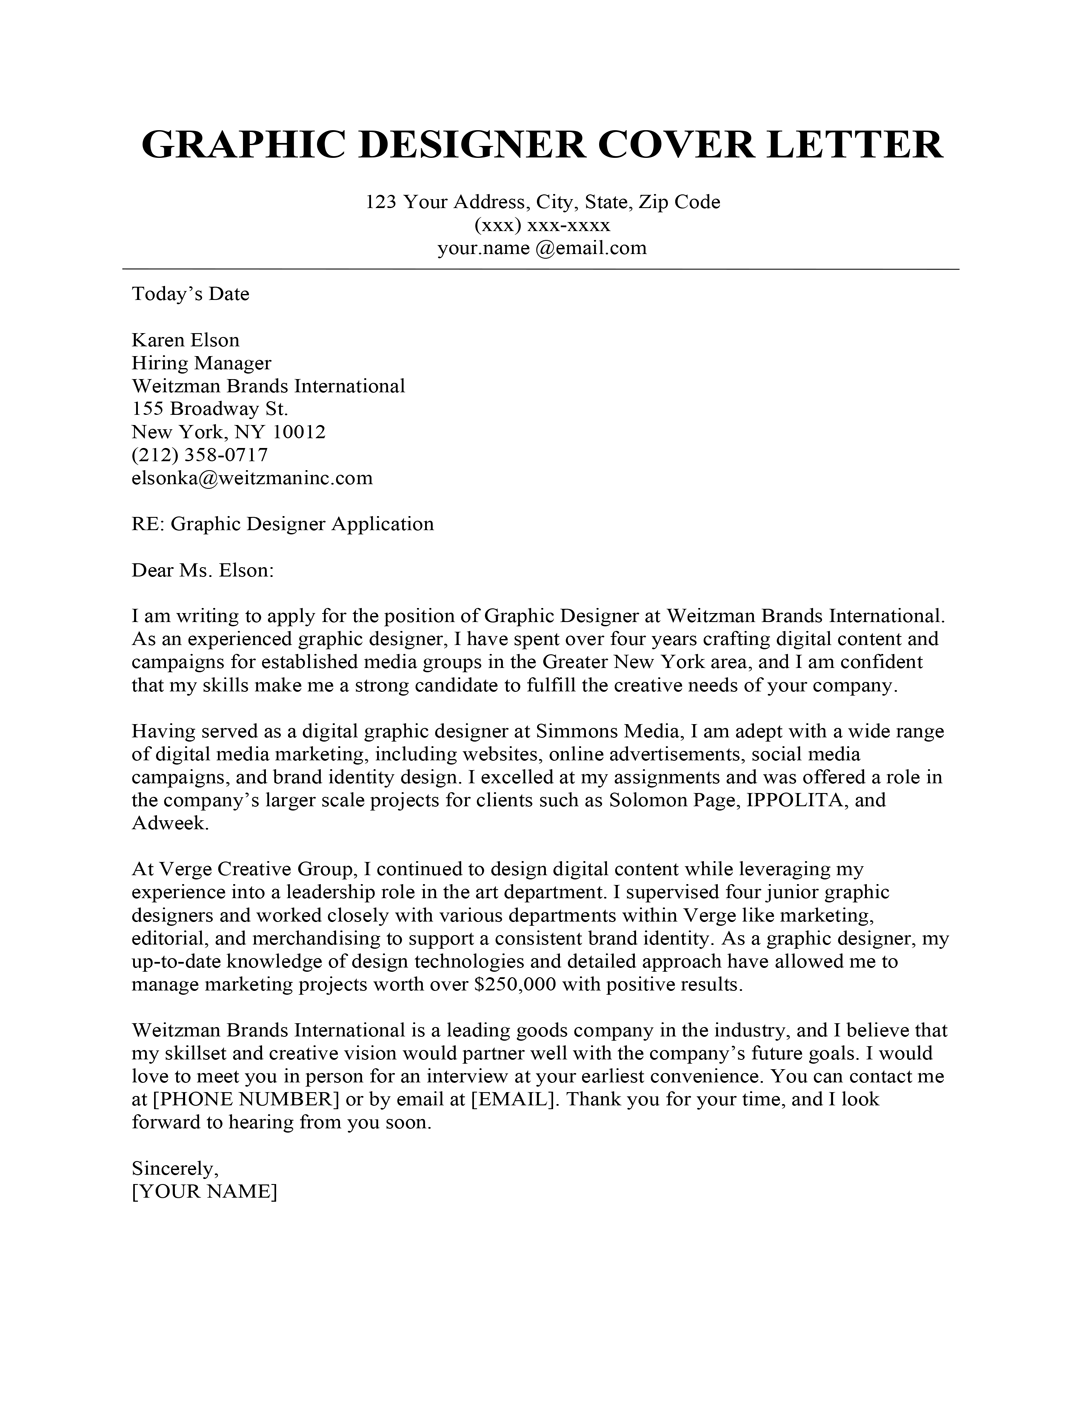 Email Cover Letter Sample from resumecompanion.com